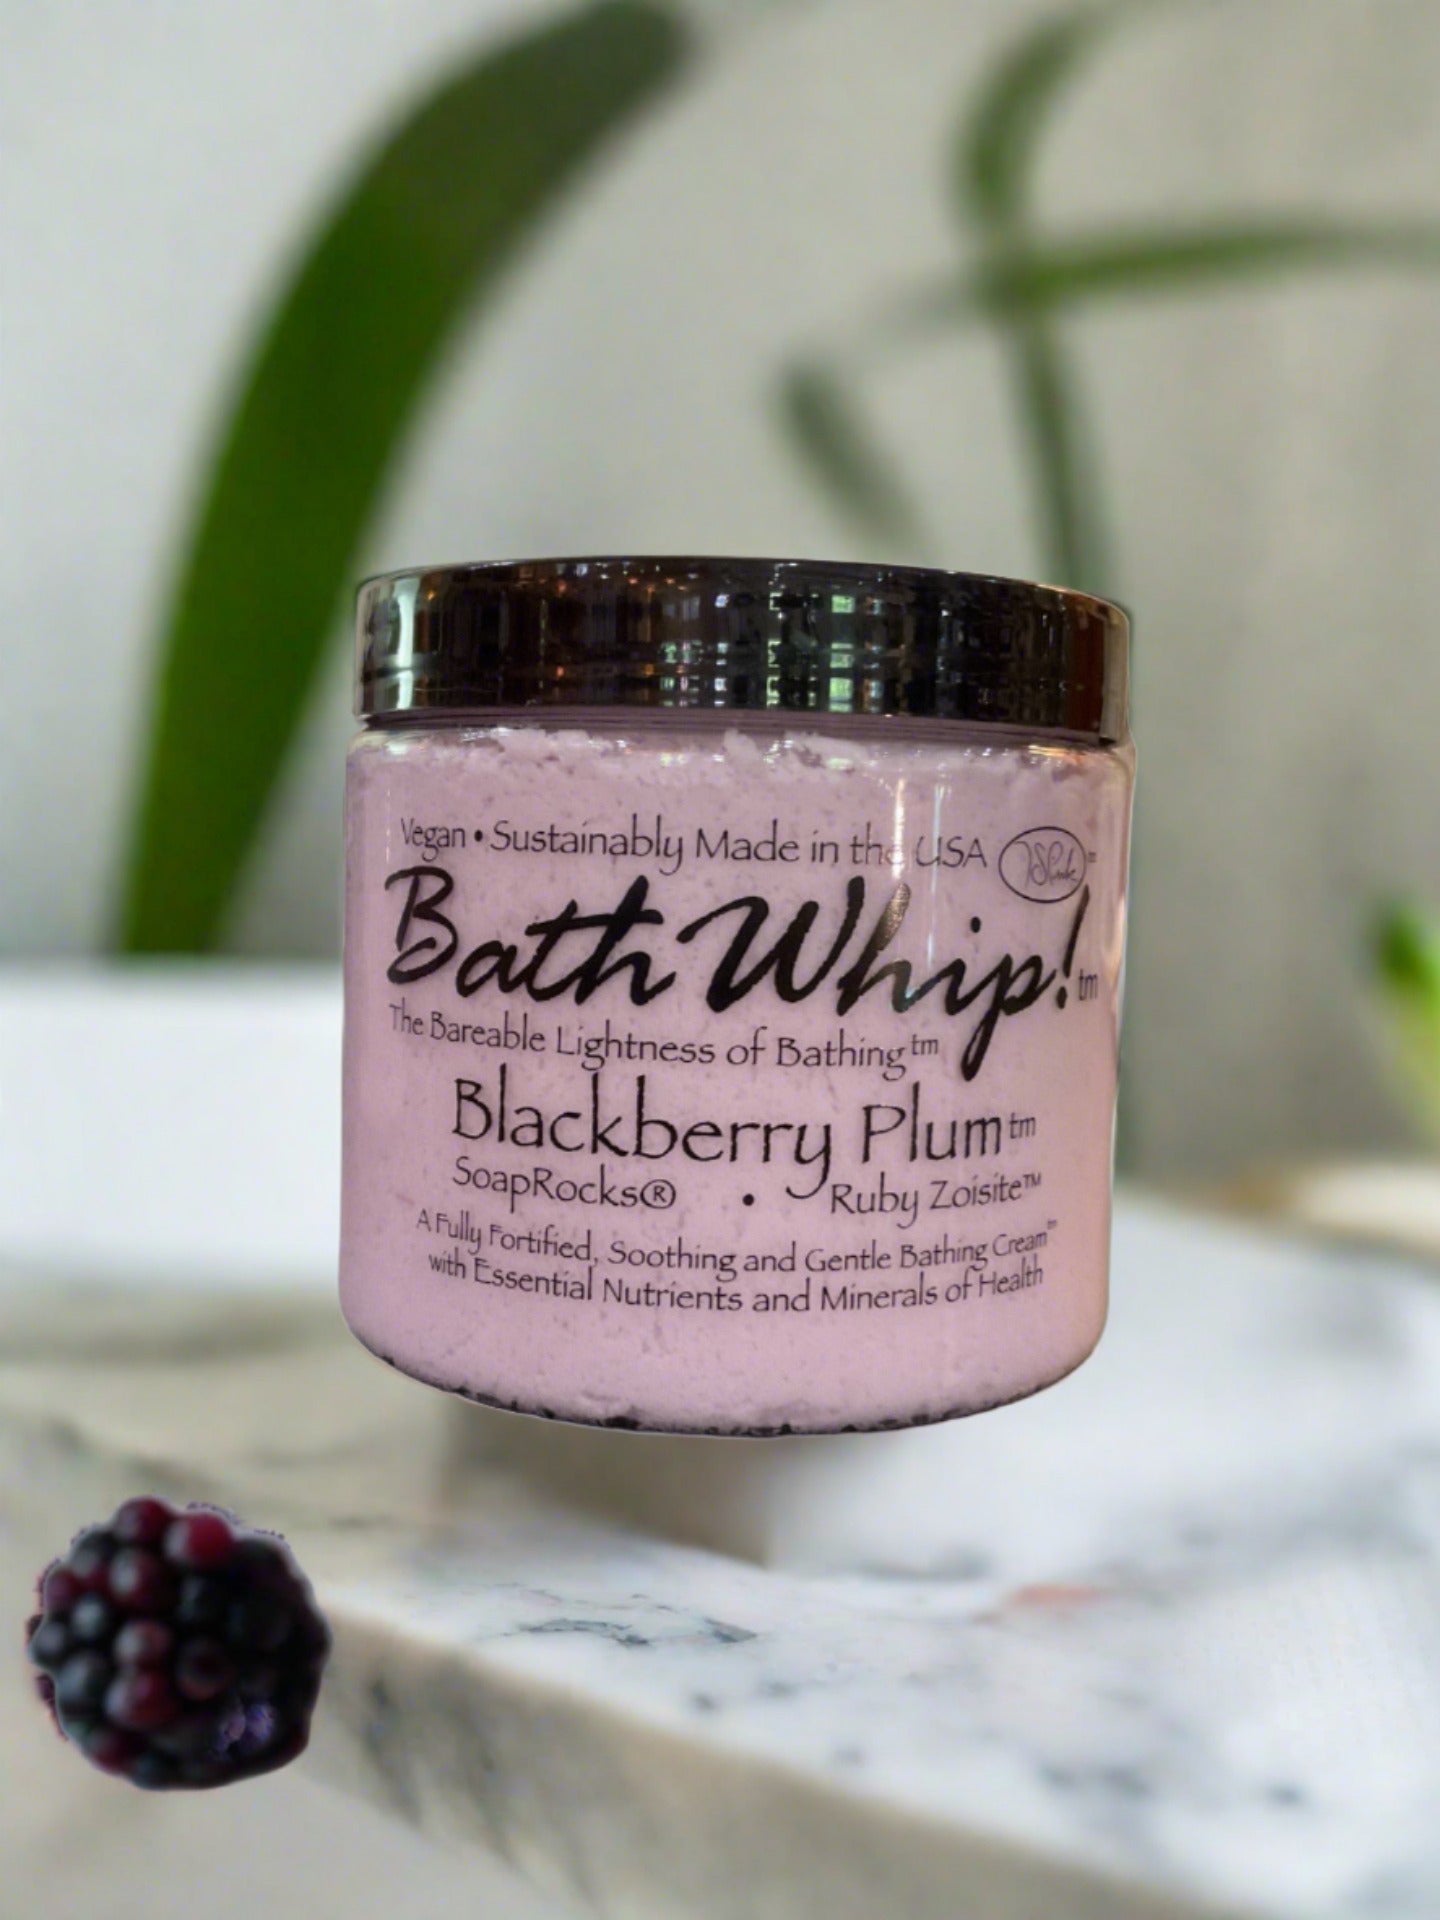 T.S Pink Foaming Mineral Bath WhipSoap- Blackberry Plum (Ruby Zoisite)